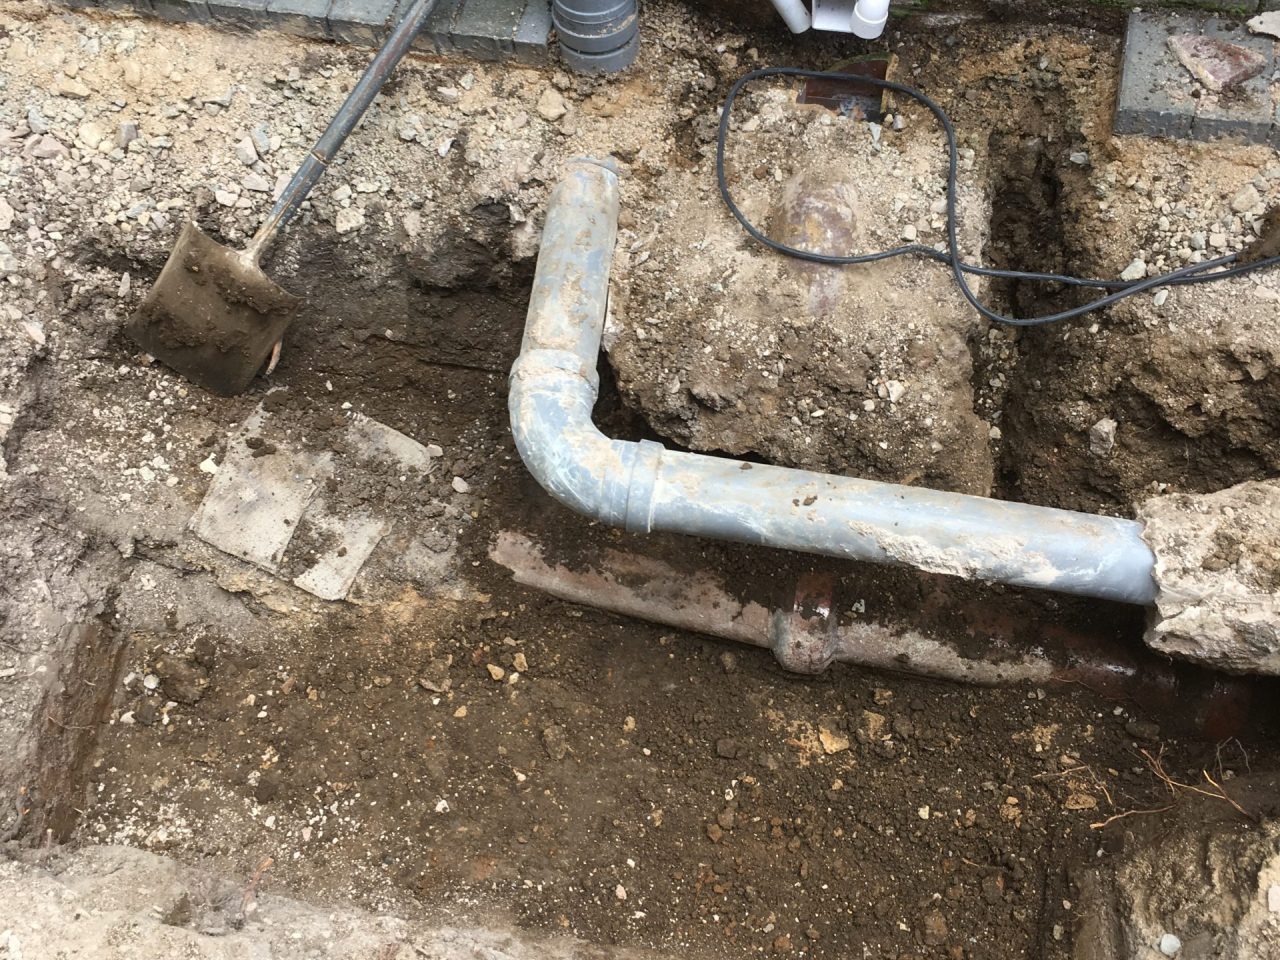 Old cracked soil pipe in need of replacement